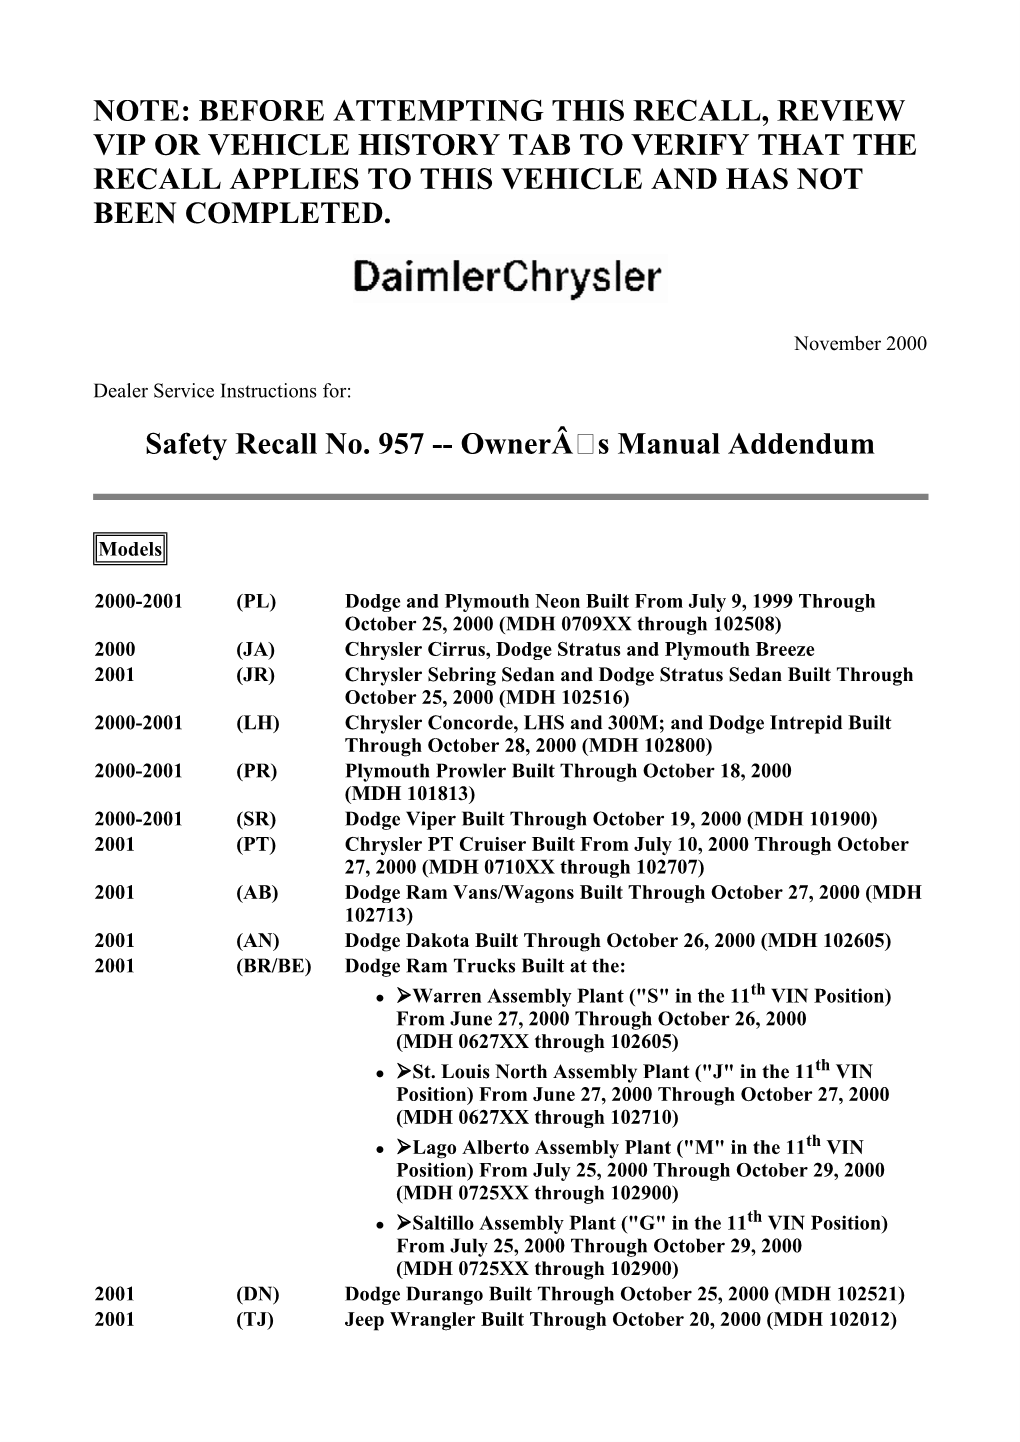 Safety Recall No. 957 -- Owners Manual Addendum